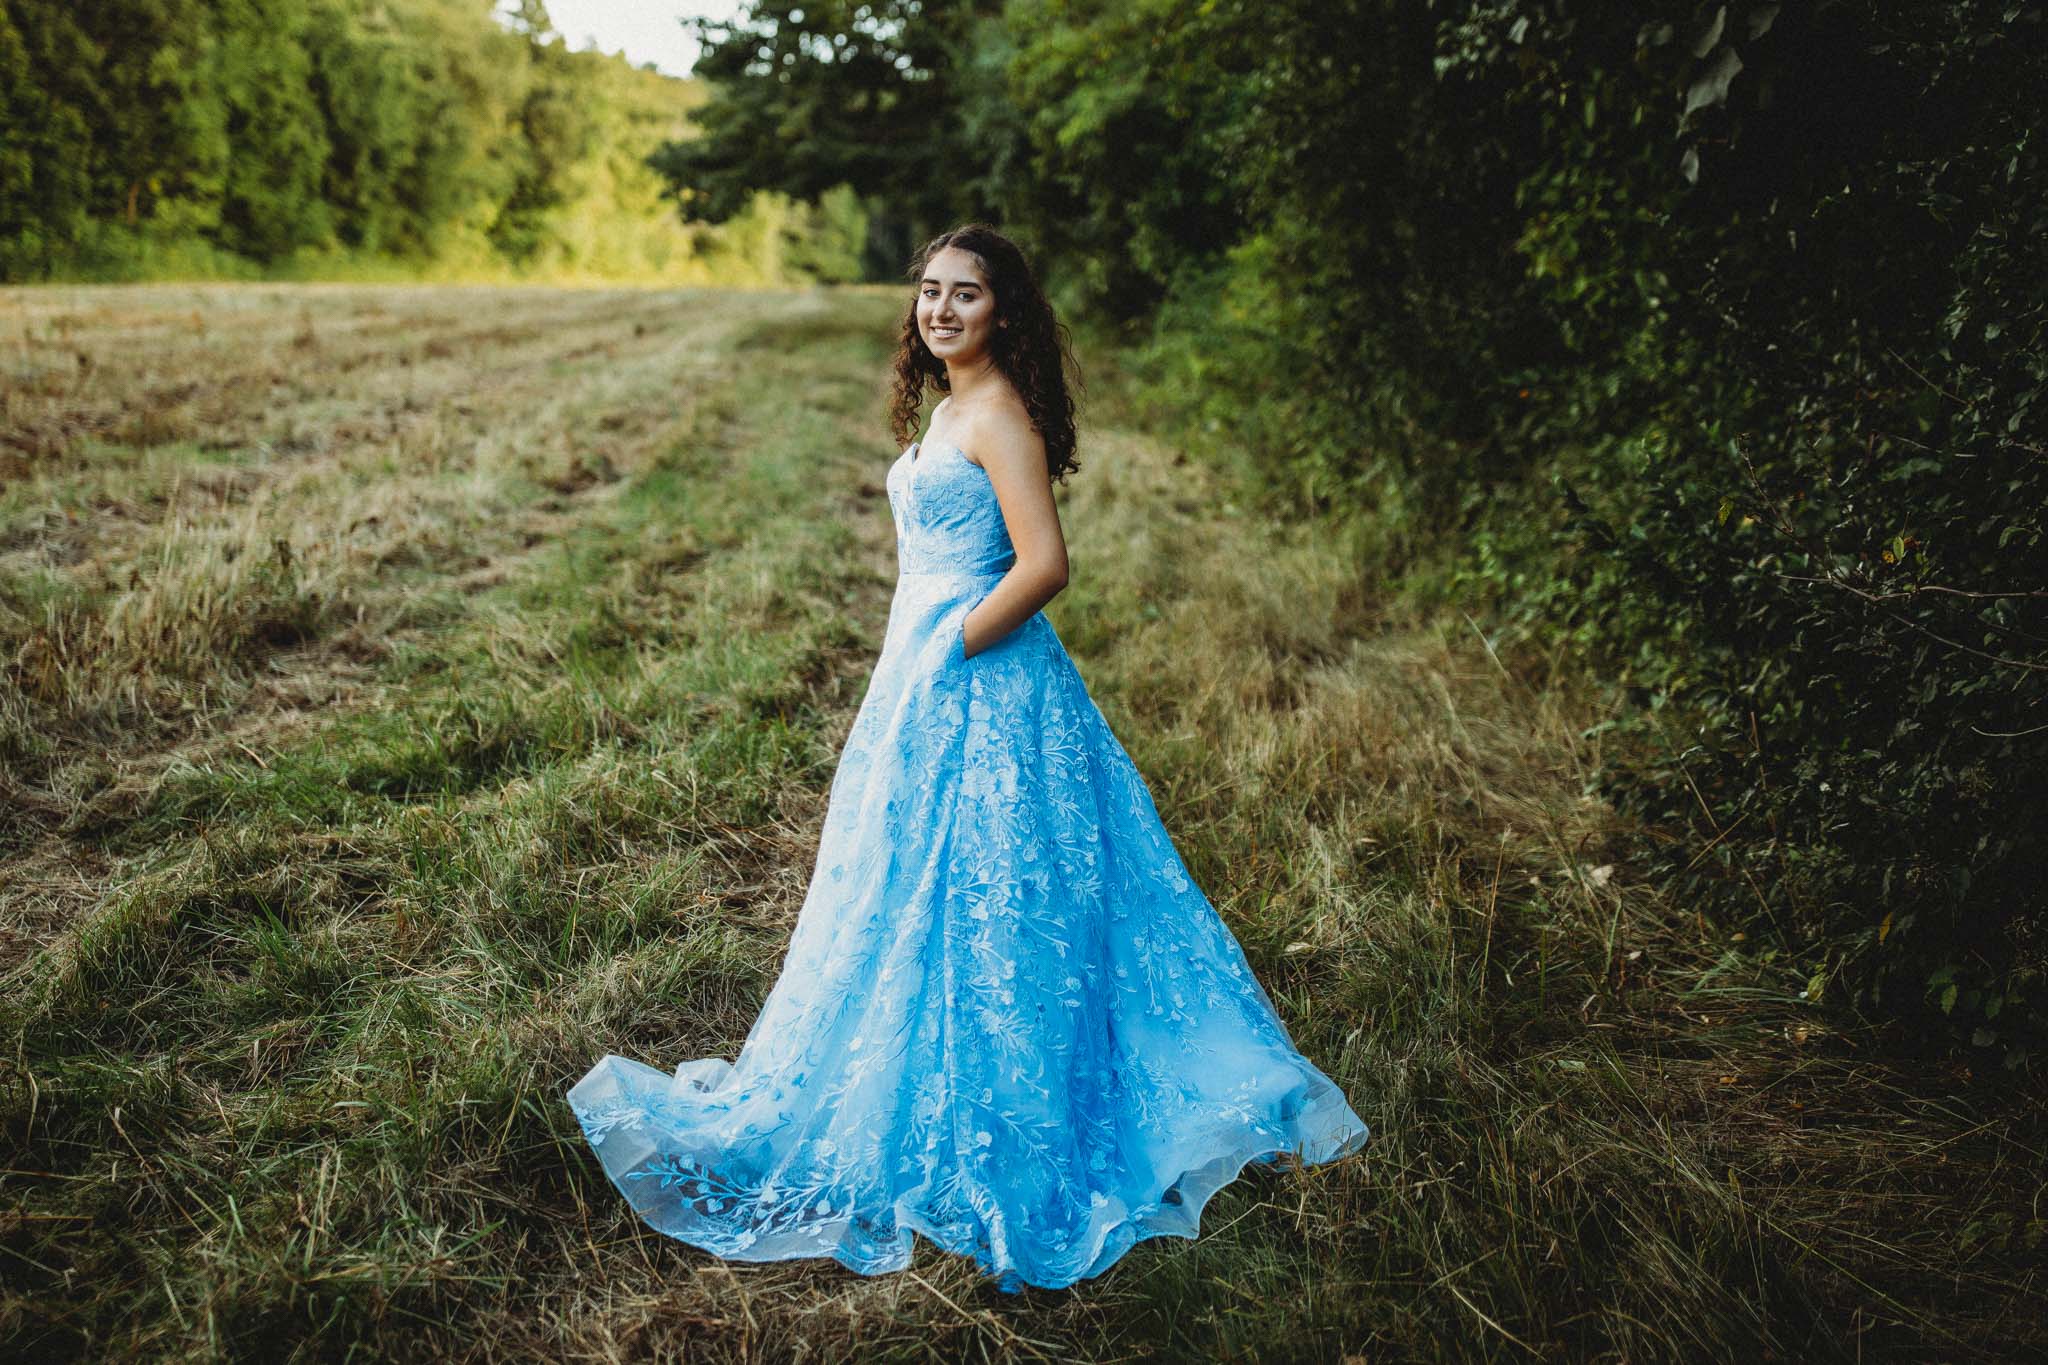 Senior portrait of a young woman wearing a long blue strapless prom dress with a floral pattern while standing in a field of long grass in Massachusetts